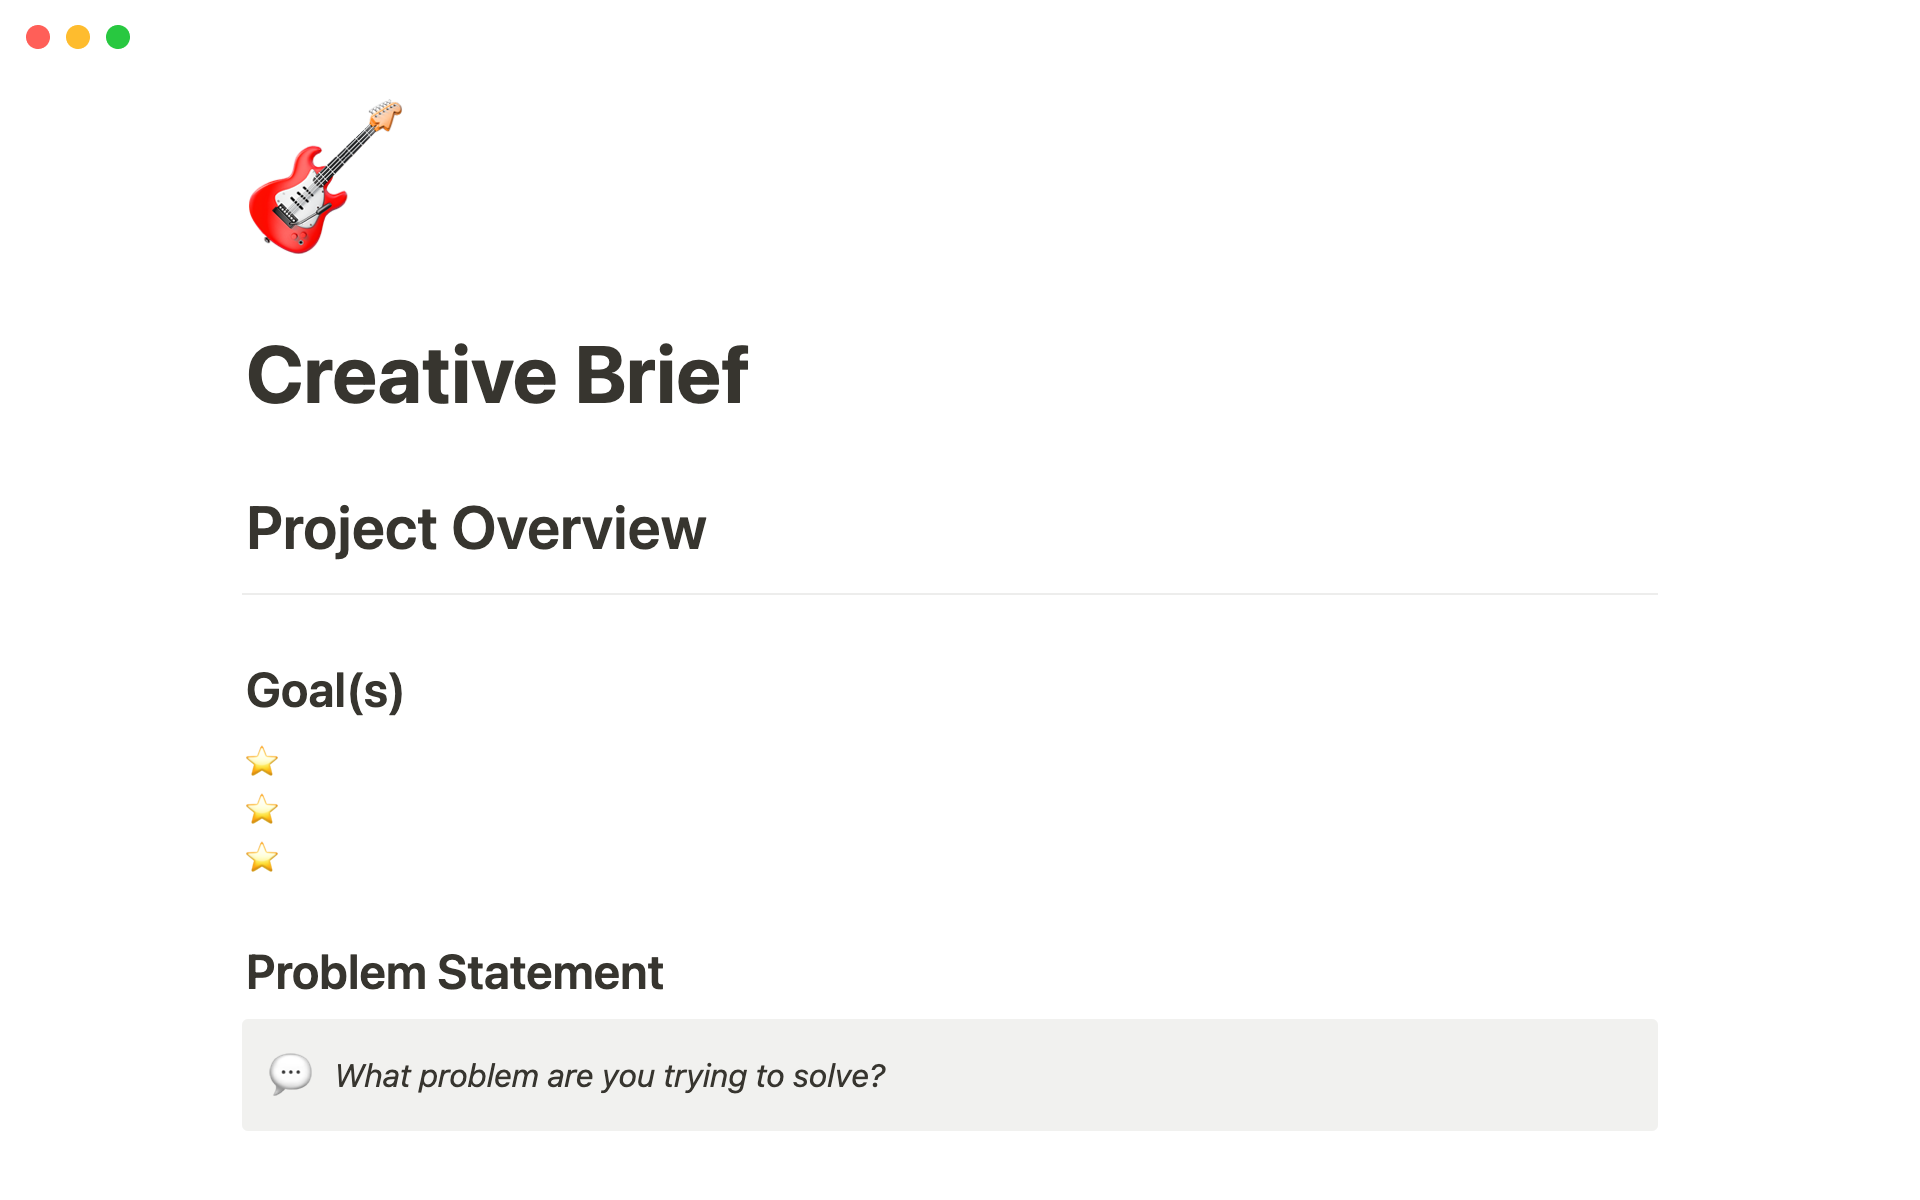 Screenshot of Best 10 Creative Brief Templates for Marketing Analysts collection by Notion